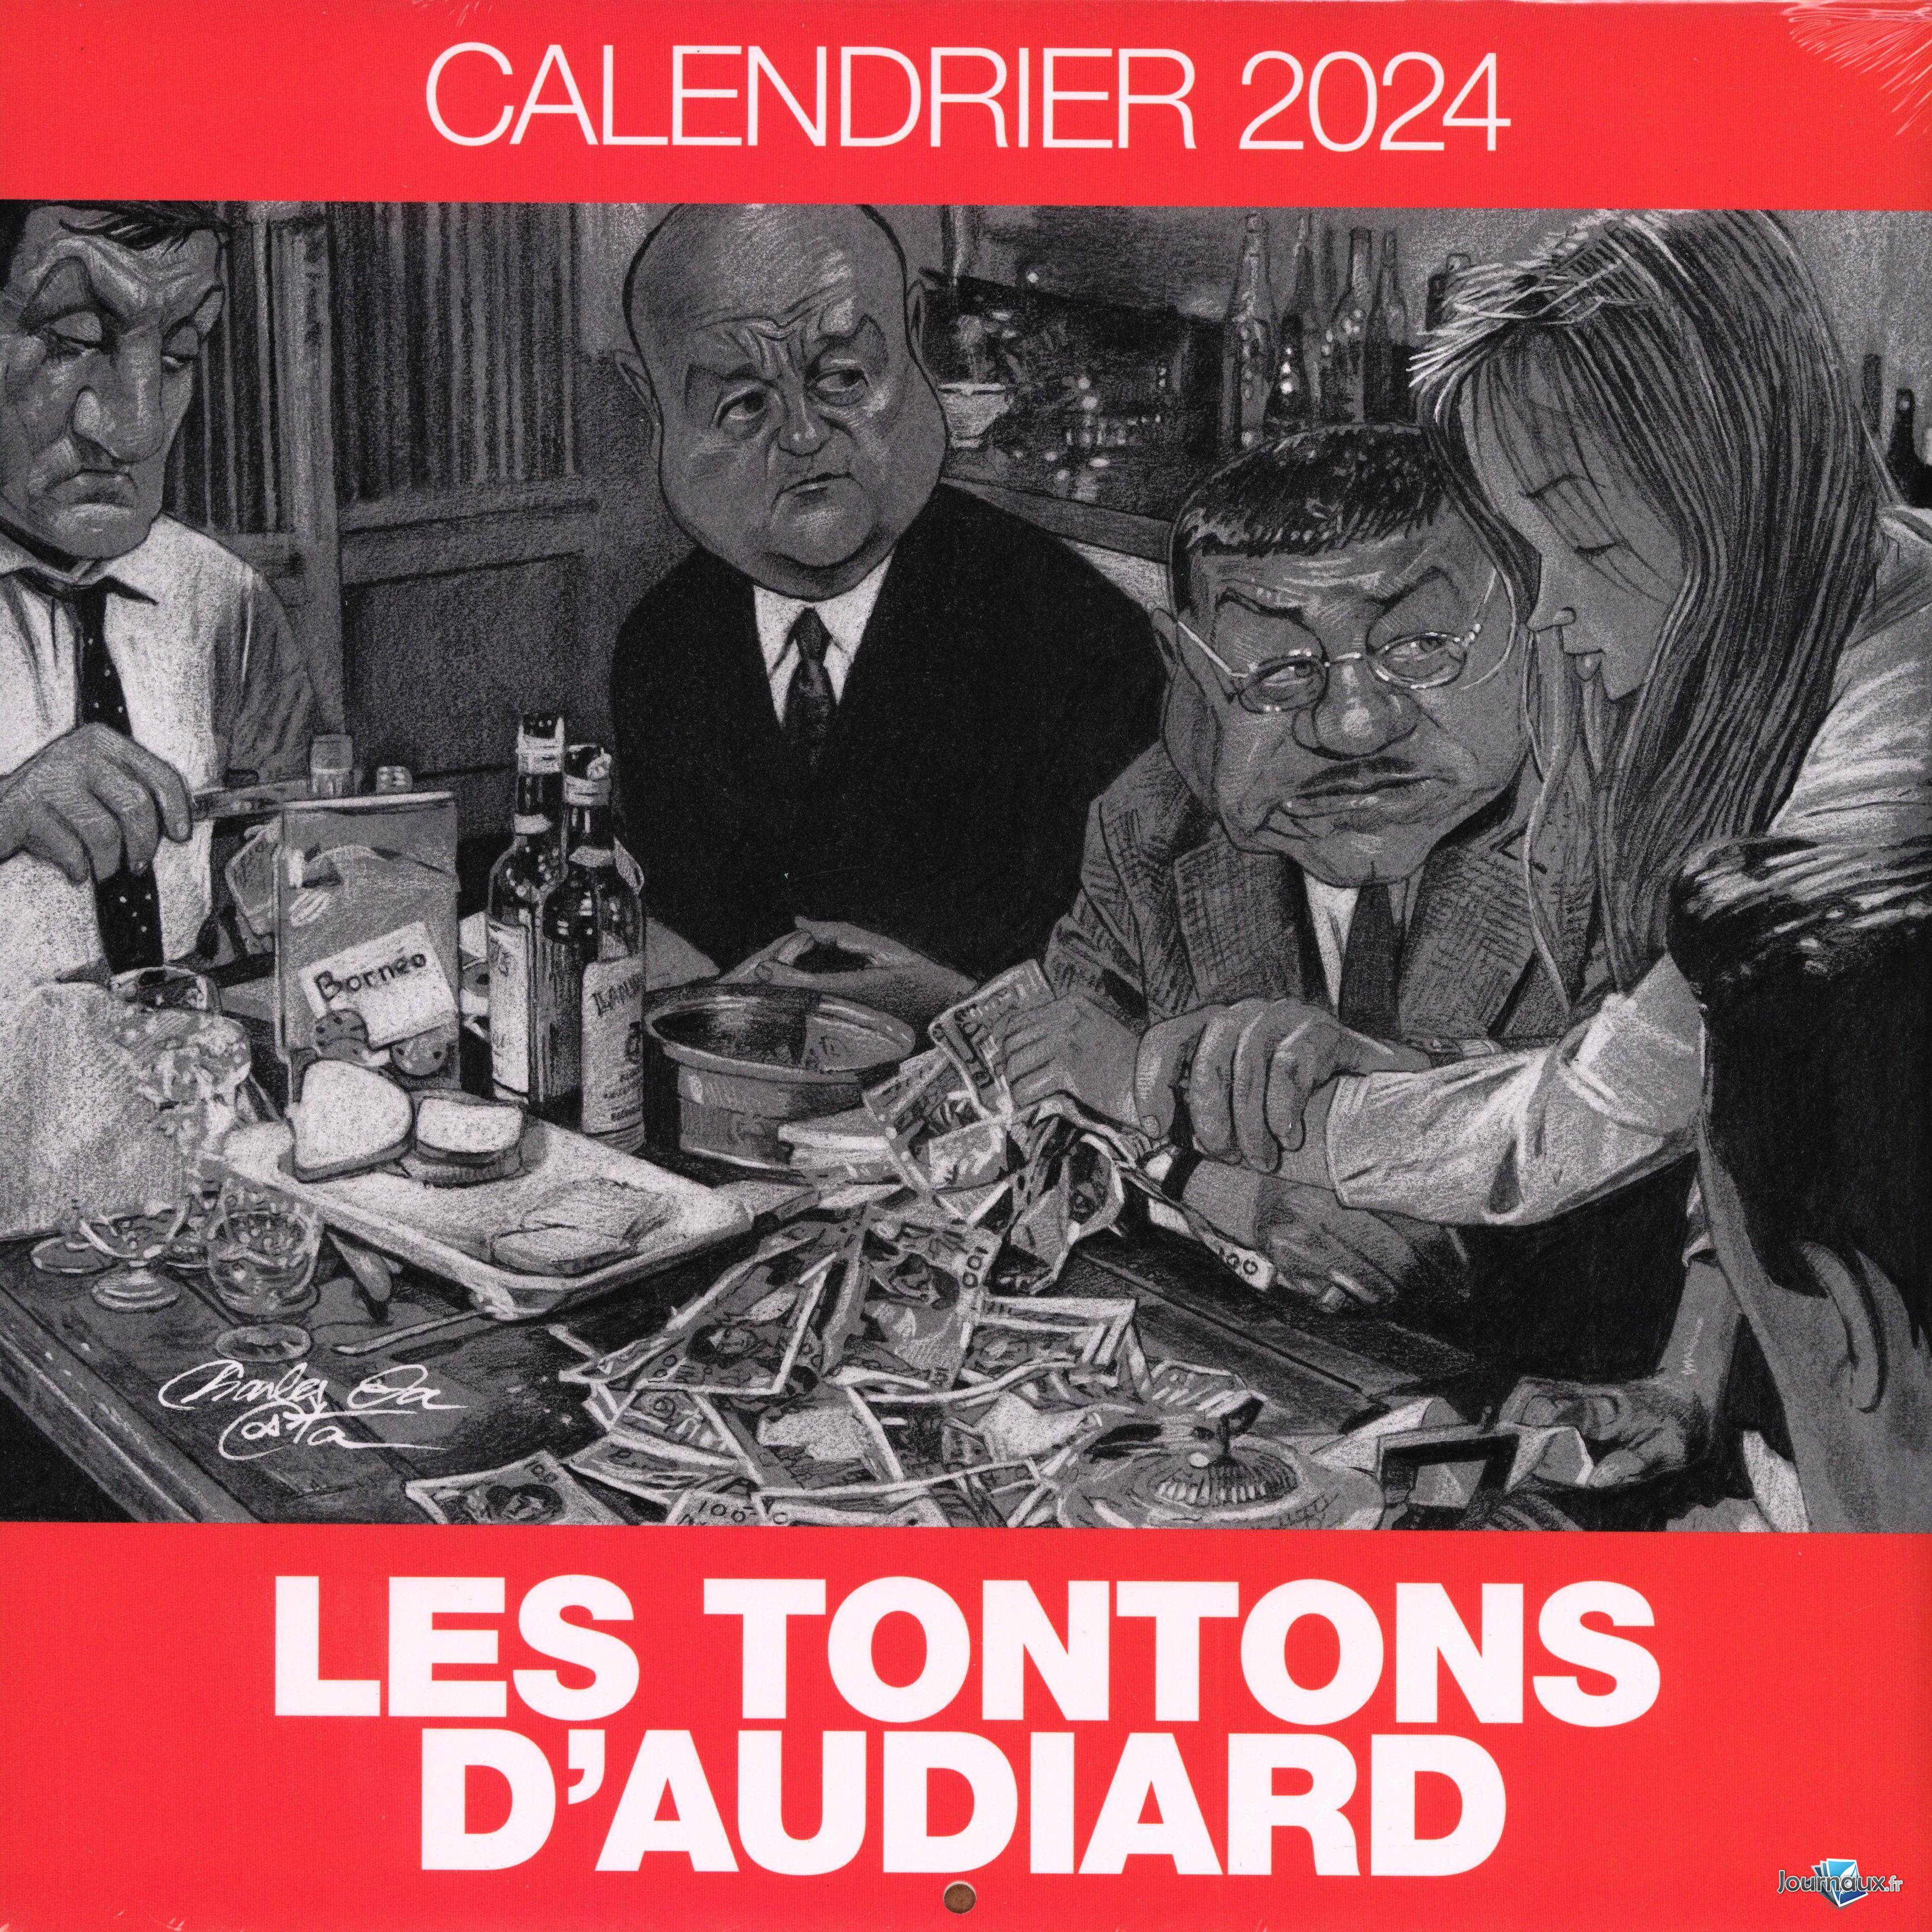 Calendrier mural 2024, calendrier complet d'astrologie, calendrier